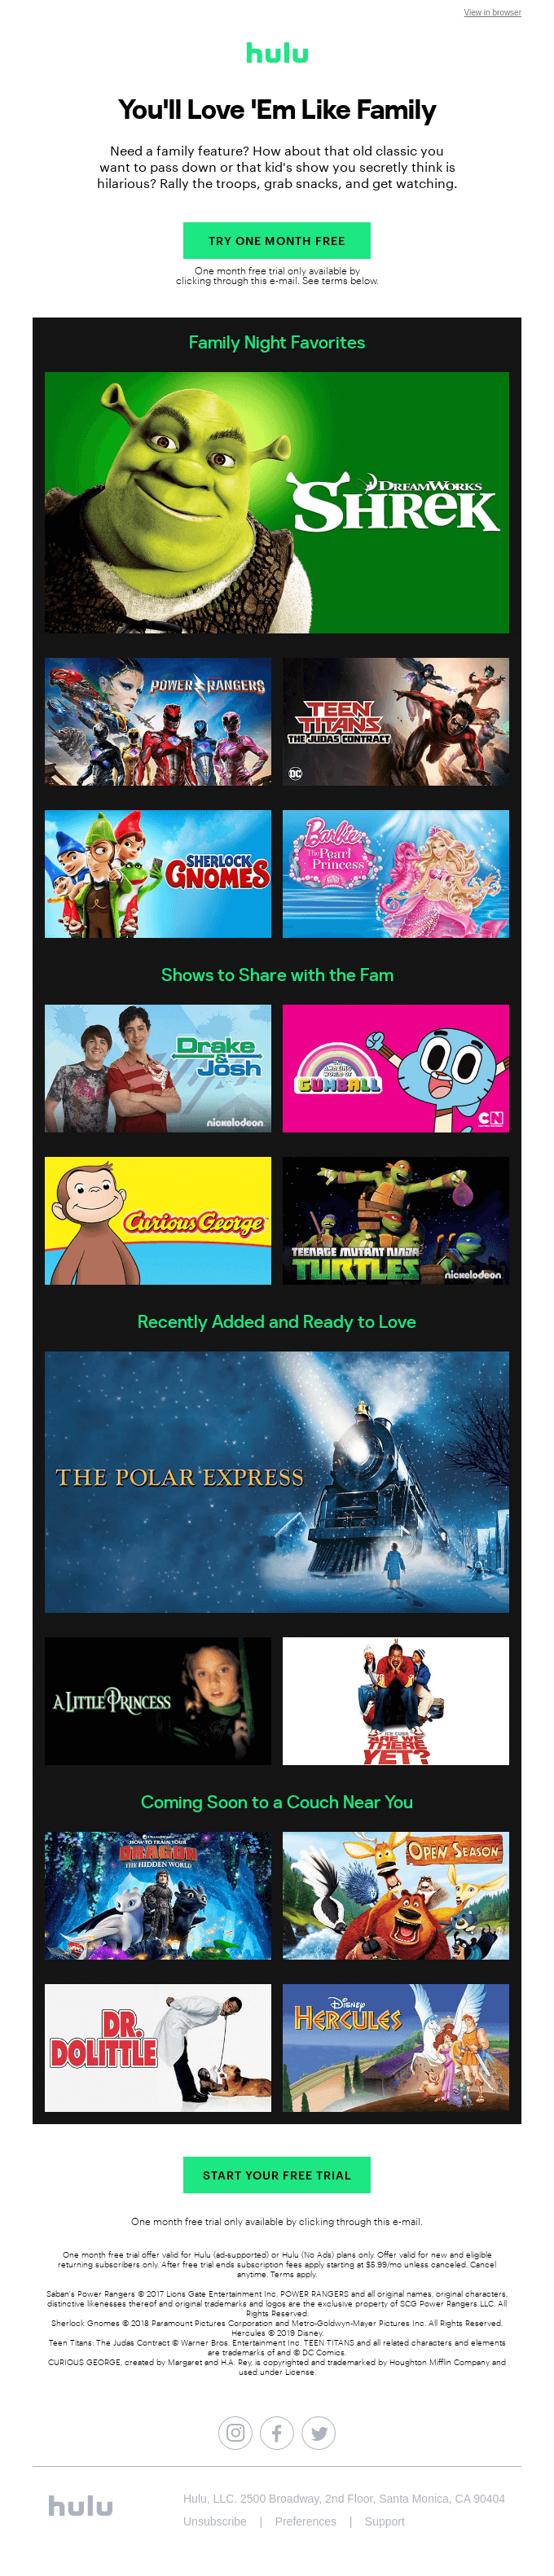 (1) Friendly Message From Hulu: Watch These Family Favorites on Hulu With a Free Month Trial